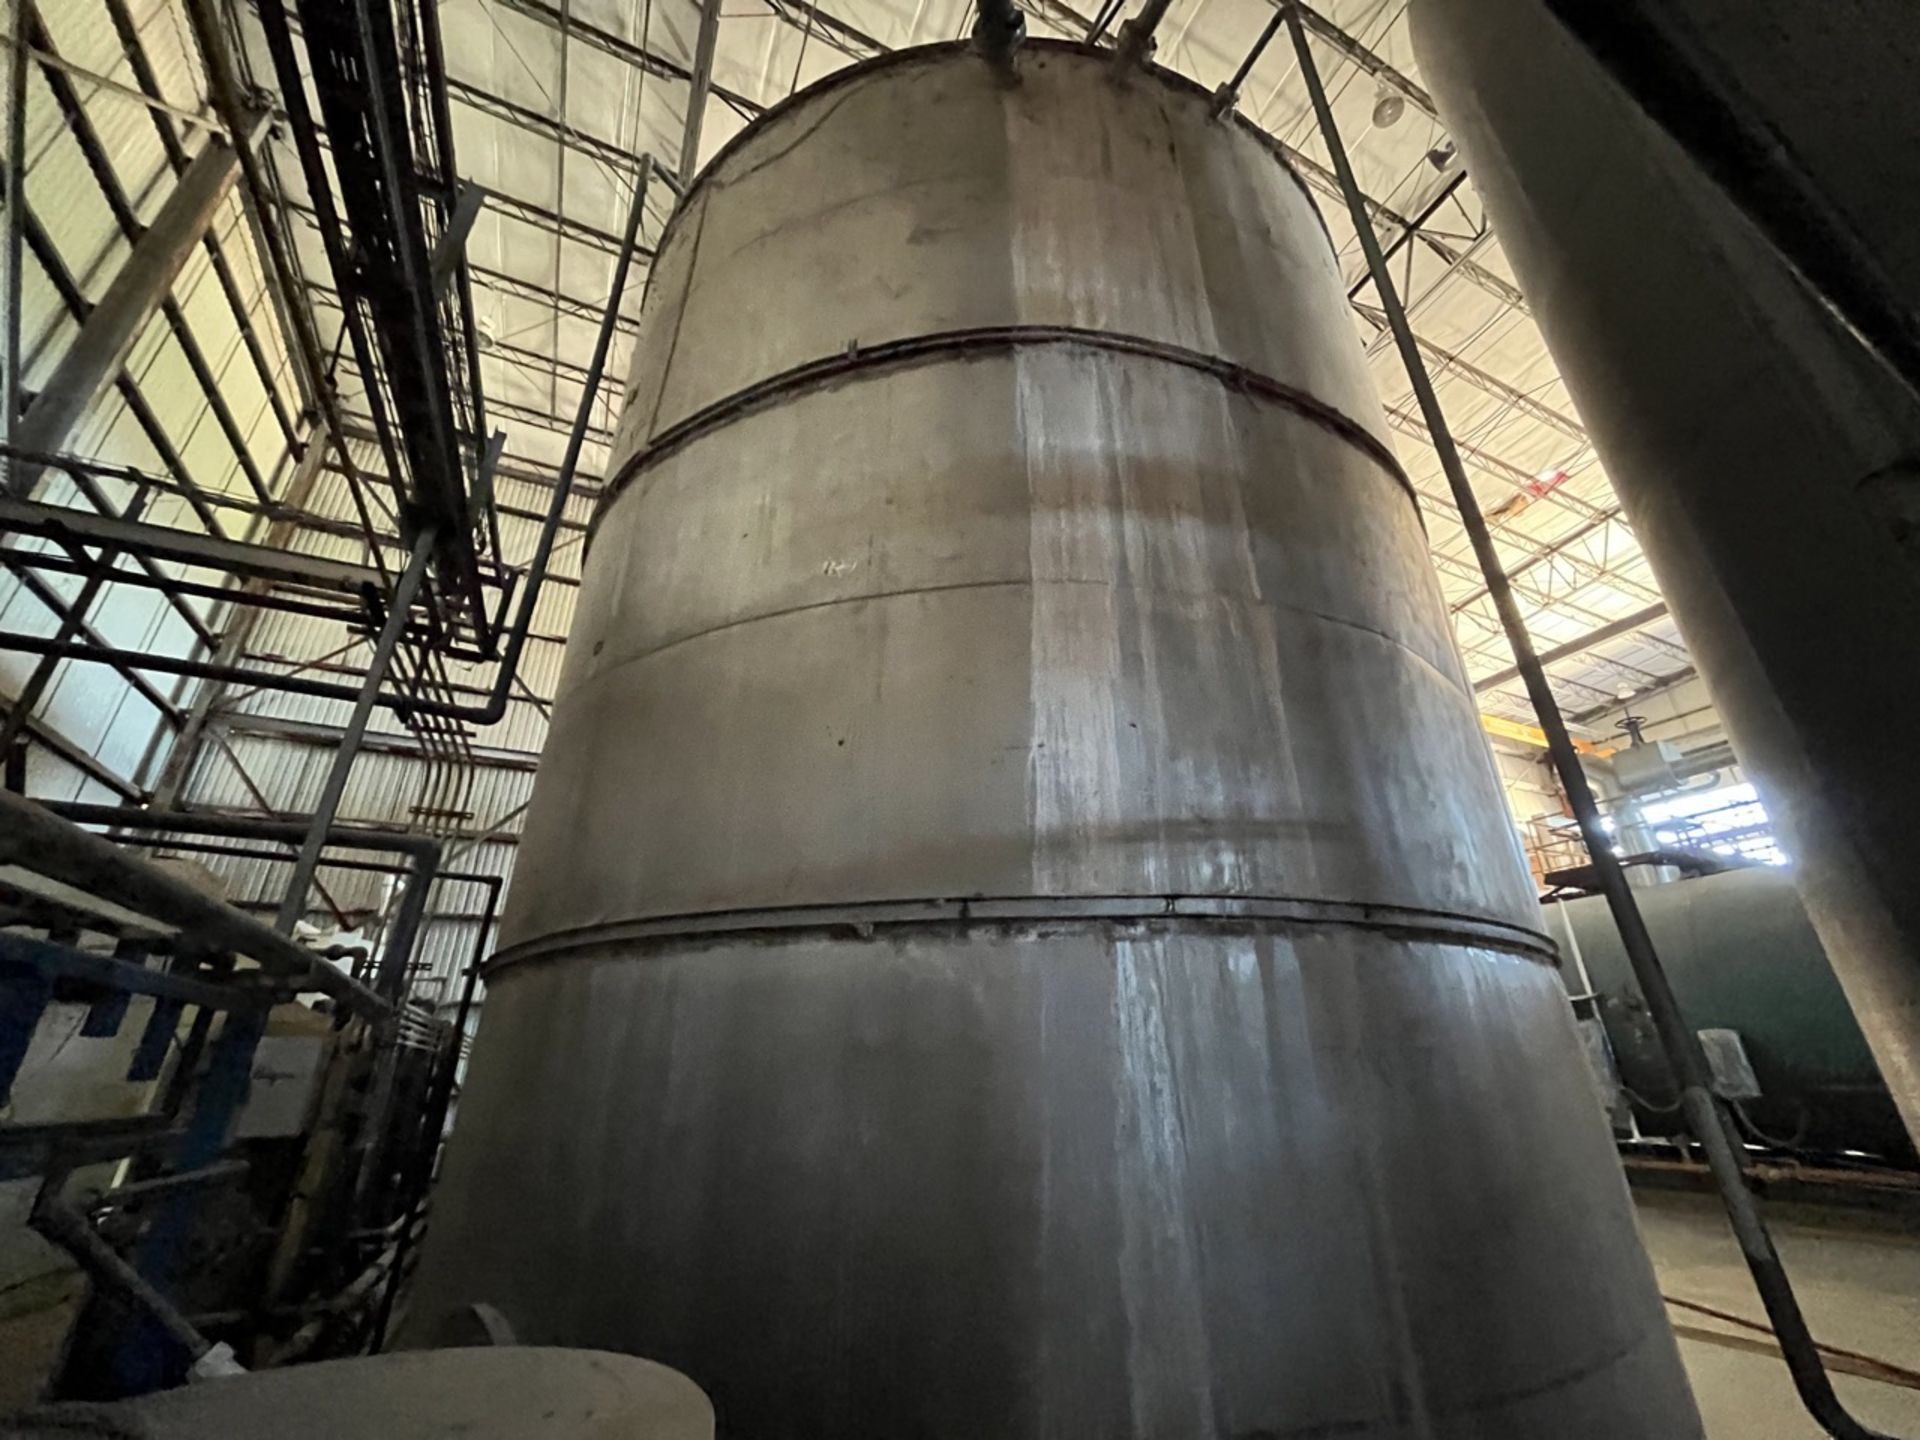 Stainless steel storage tank with a capacity of 192,163 liters, measuring approximately 6 meters in - Bild 5 aus 9